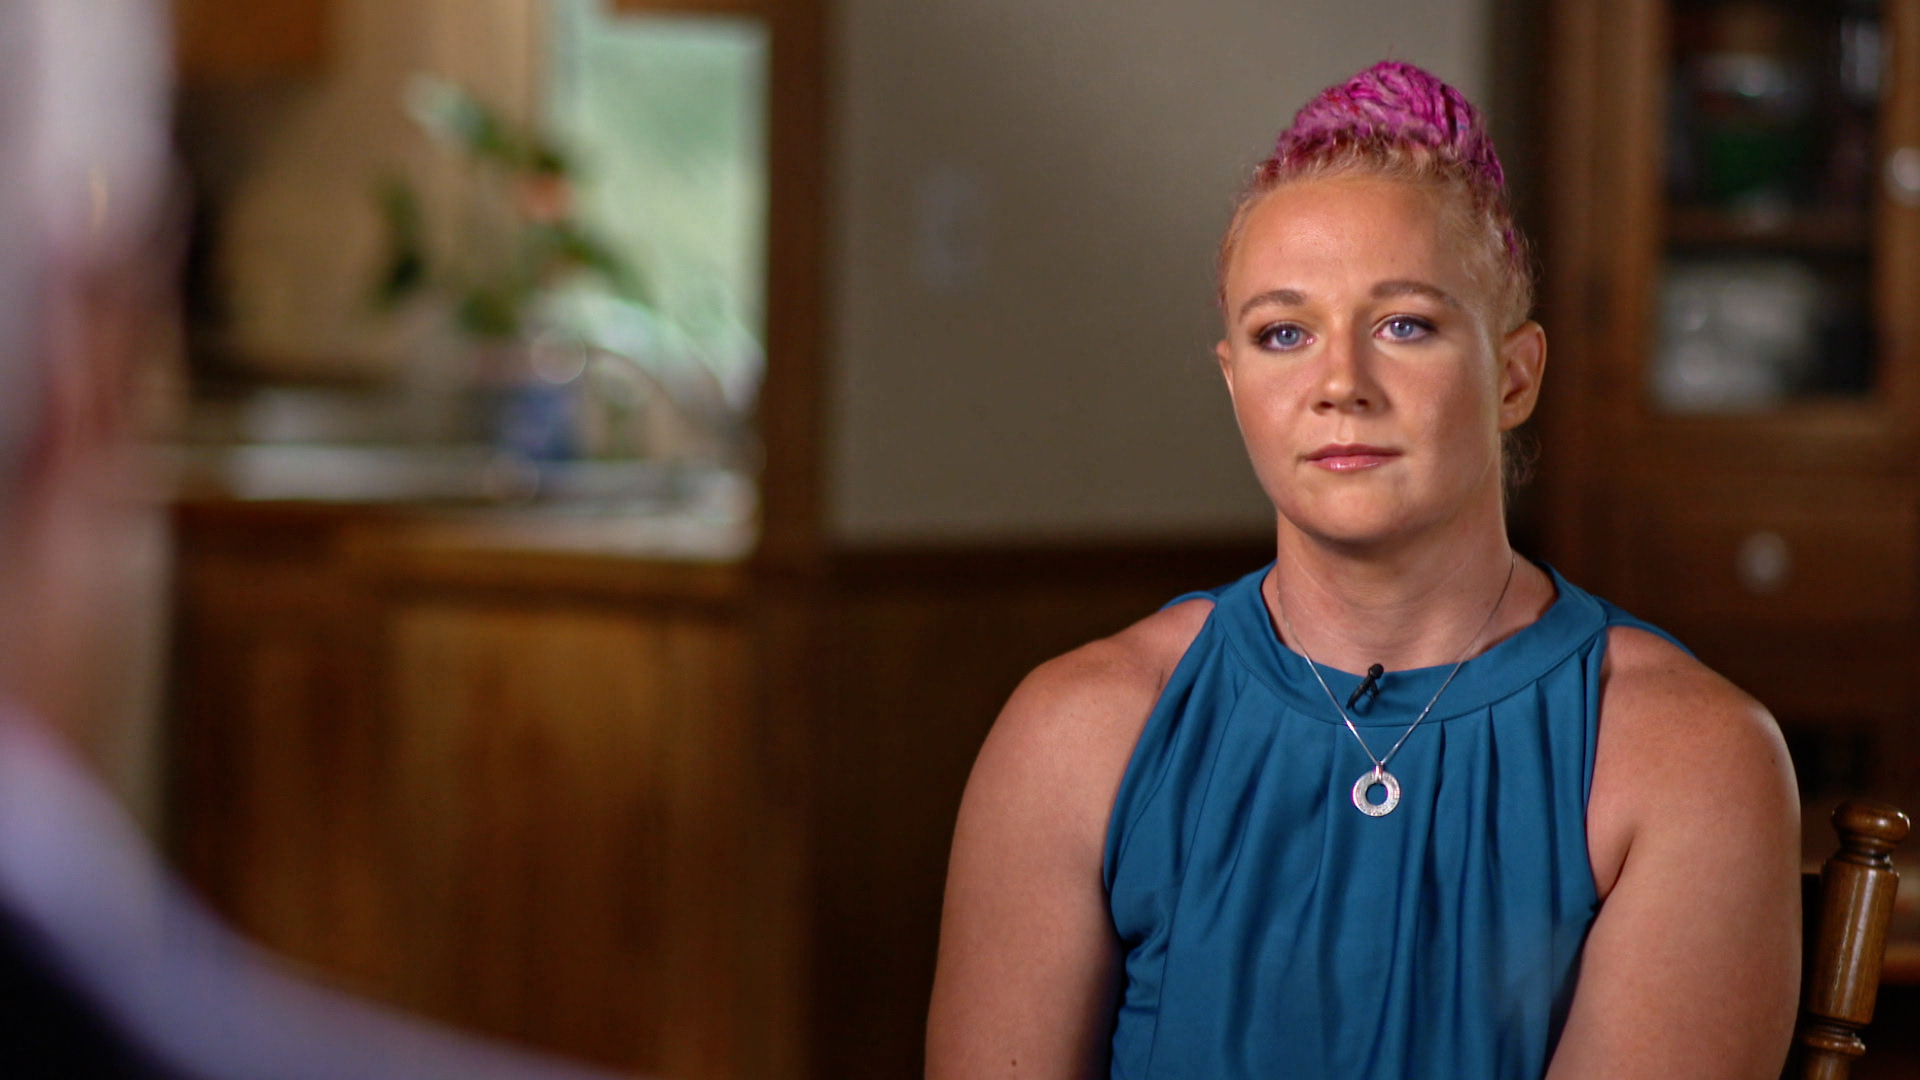 Watch 60 Minutes Reality Winner The 60 Minutes Interview Full show